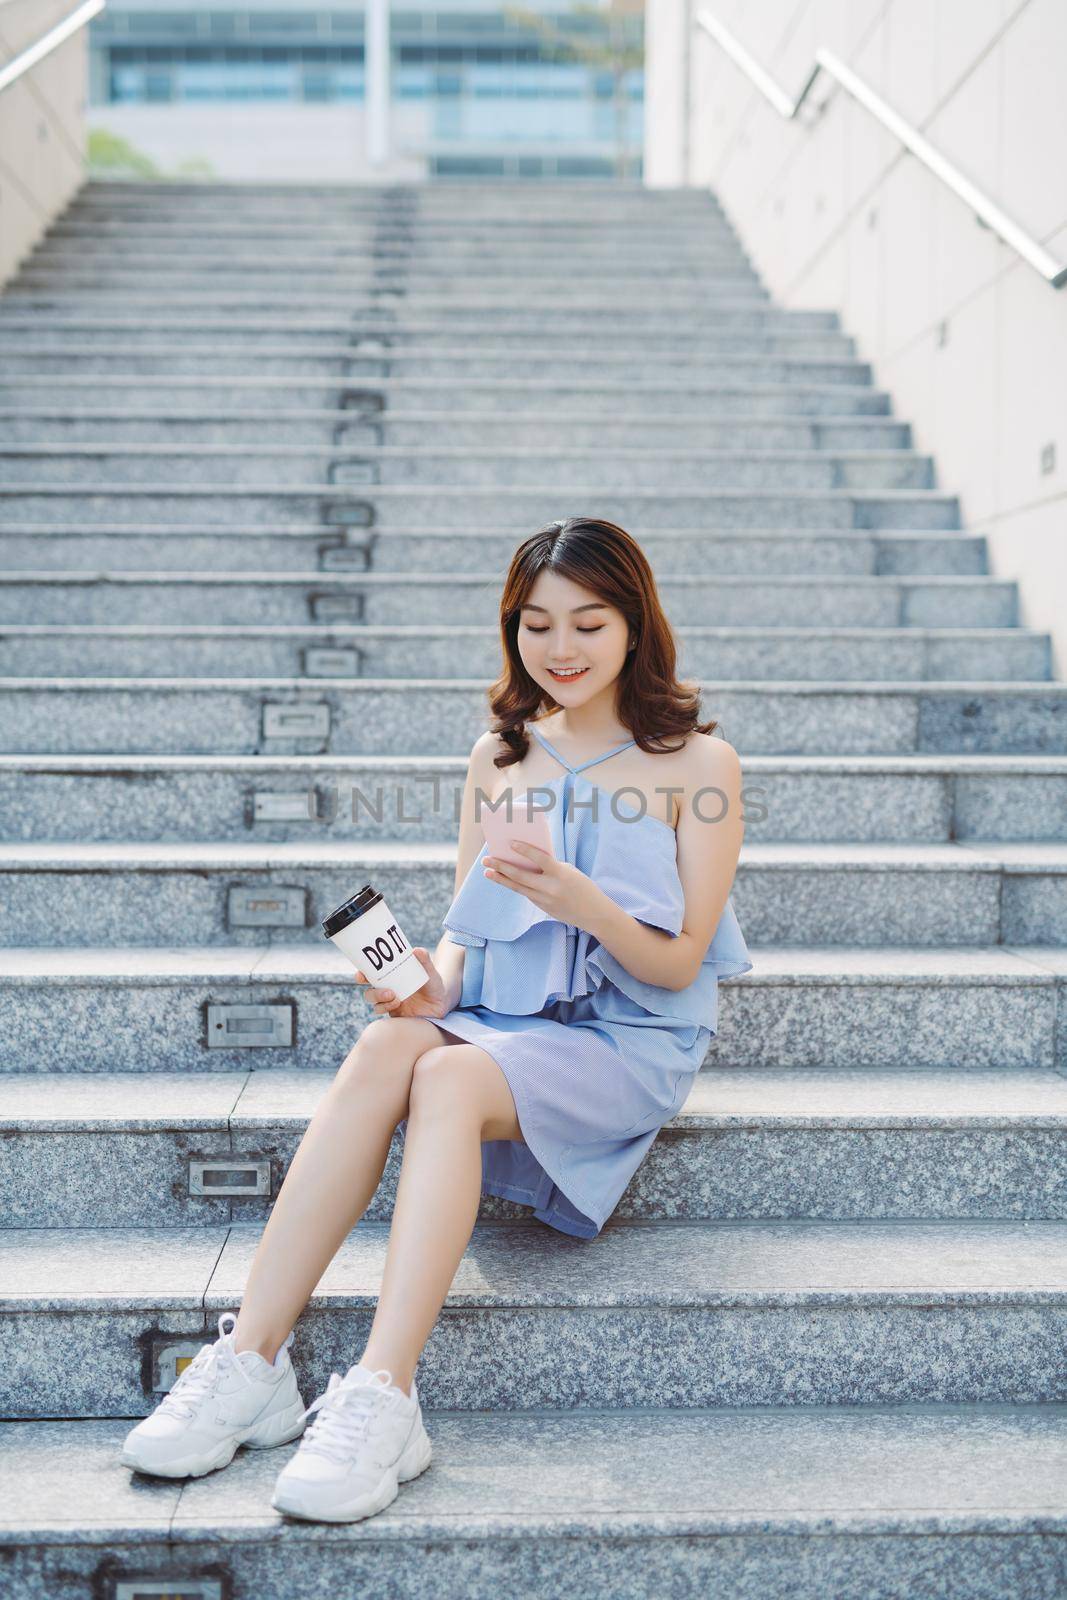 Beautiful young Asian woman sitting at outdoor stair and using smartphone. Lifestyle of modern female.